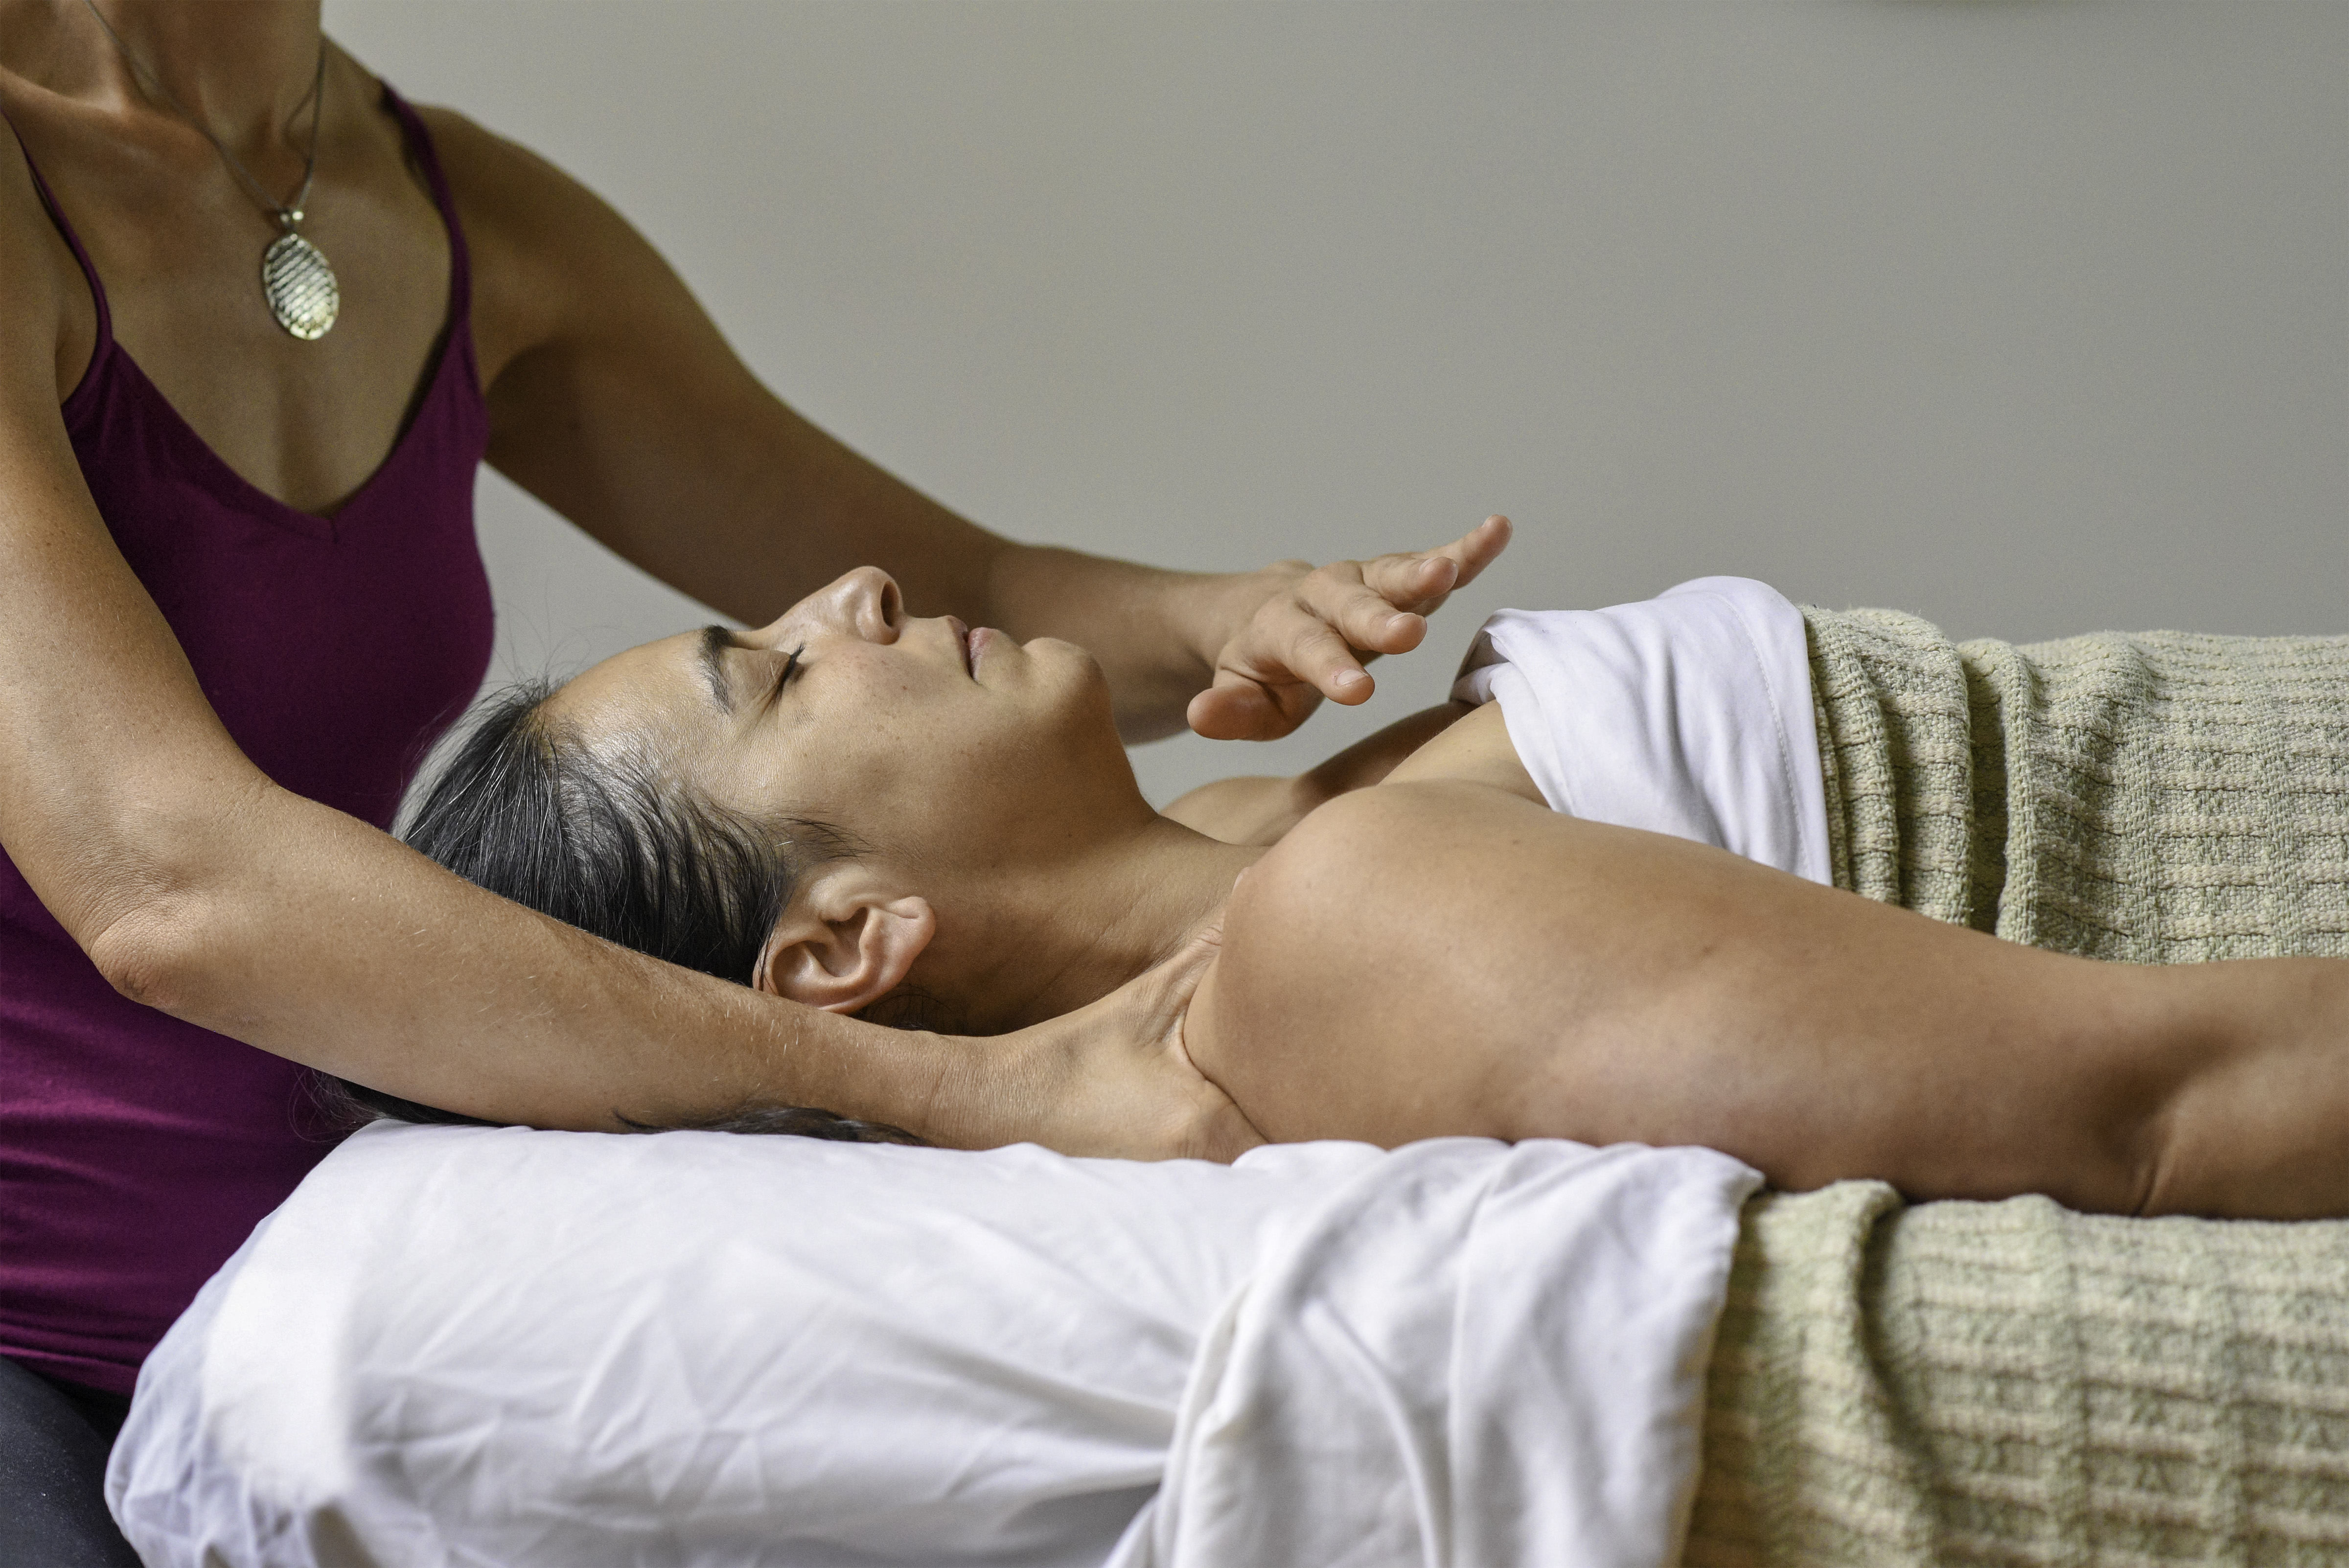 Reiki Level 1 Training – Saturday, August 3rd 9:30am-5:00pm – SOLD OUT (WAITLIST only)